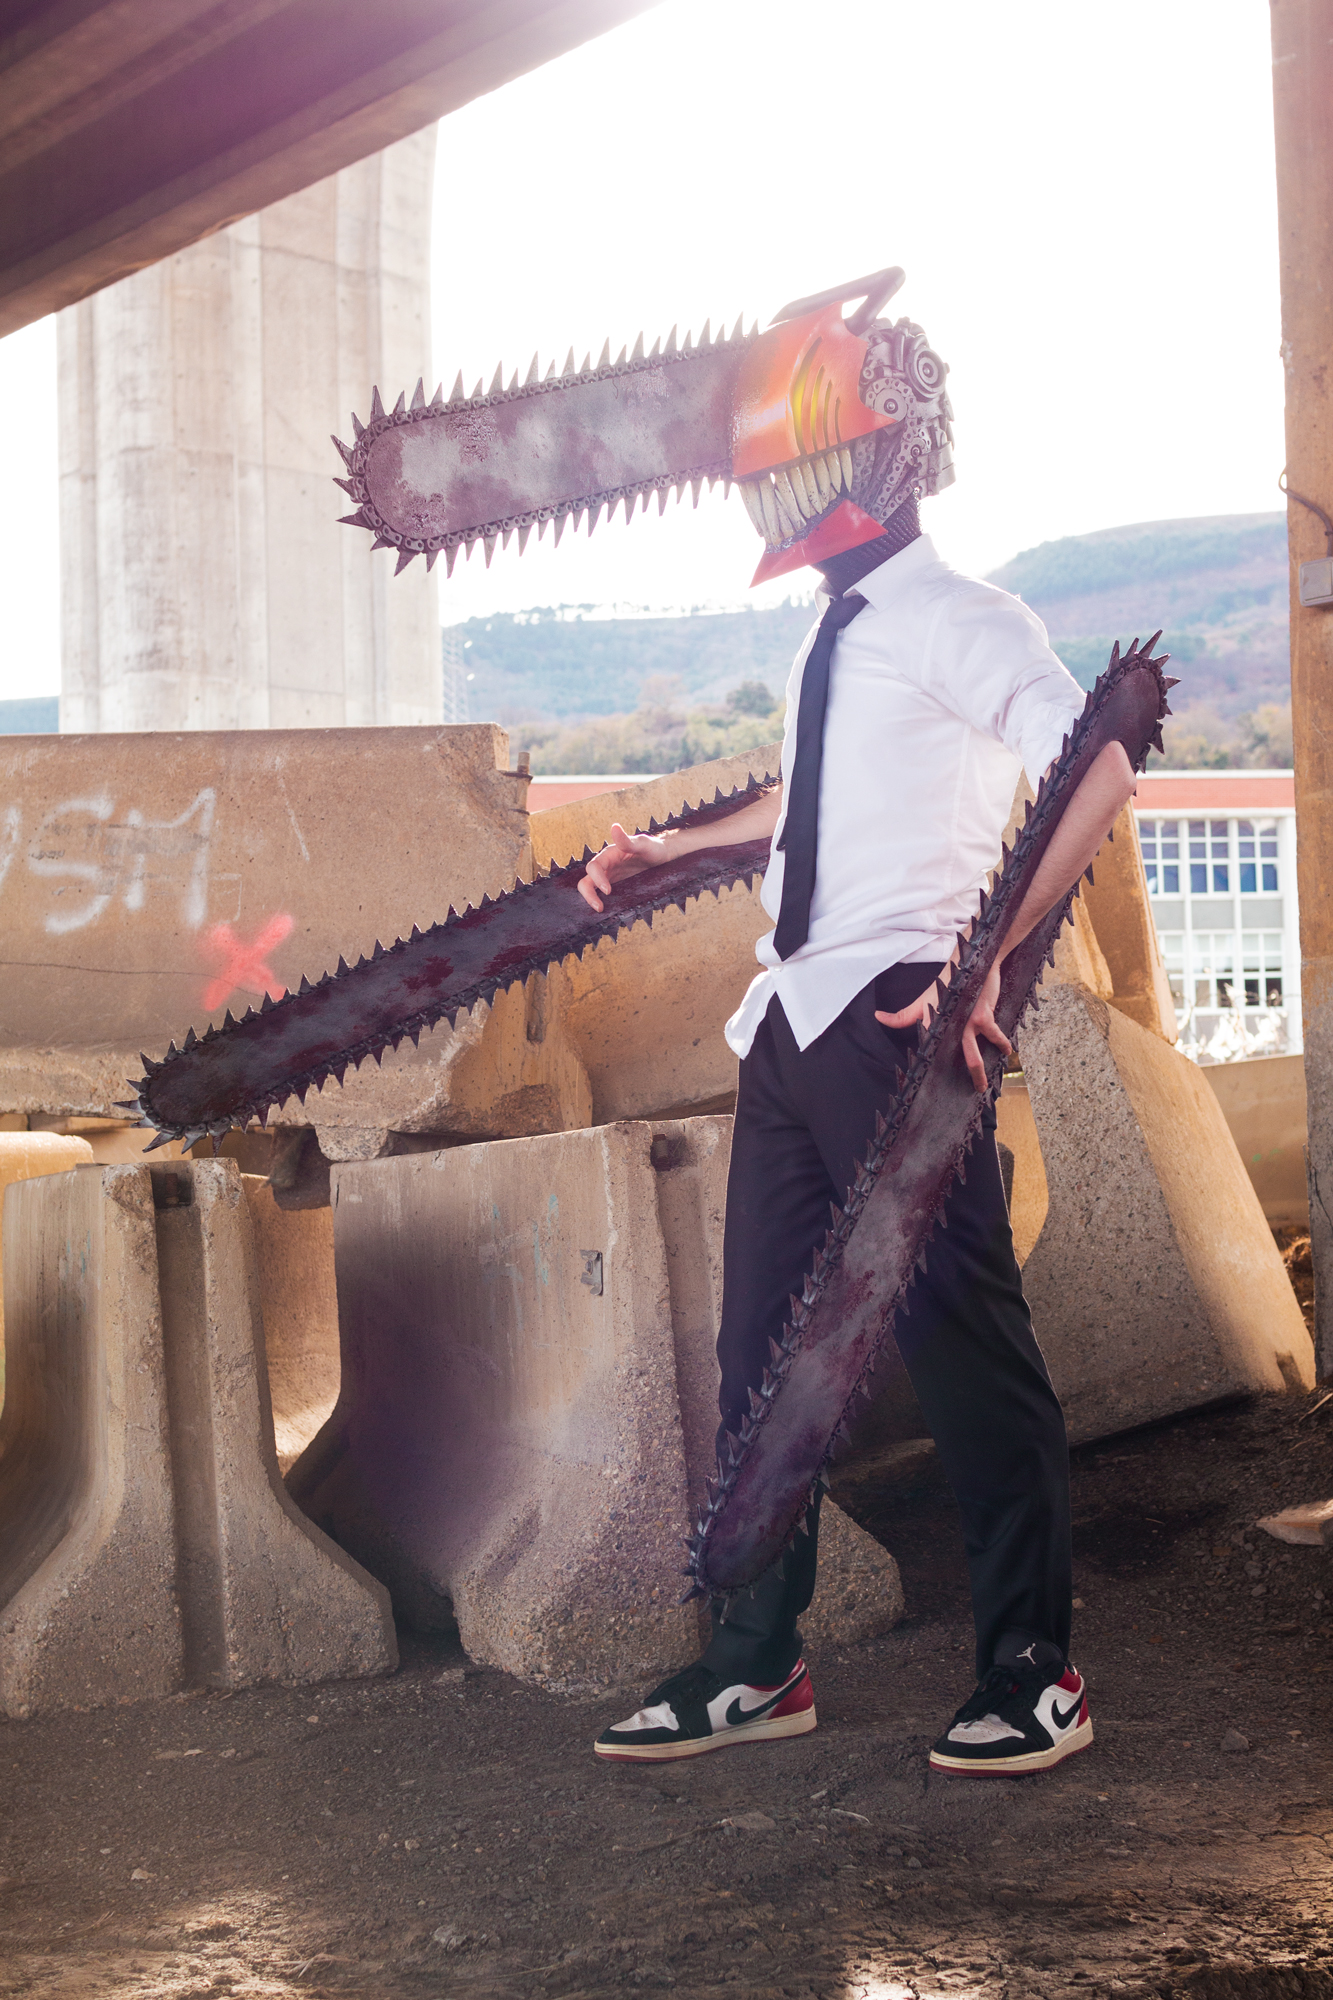 Chainsaw man cosplay by Andivicosplay on DeviantArt